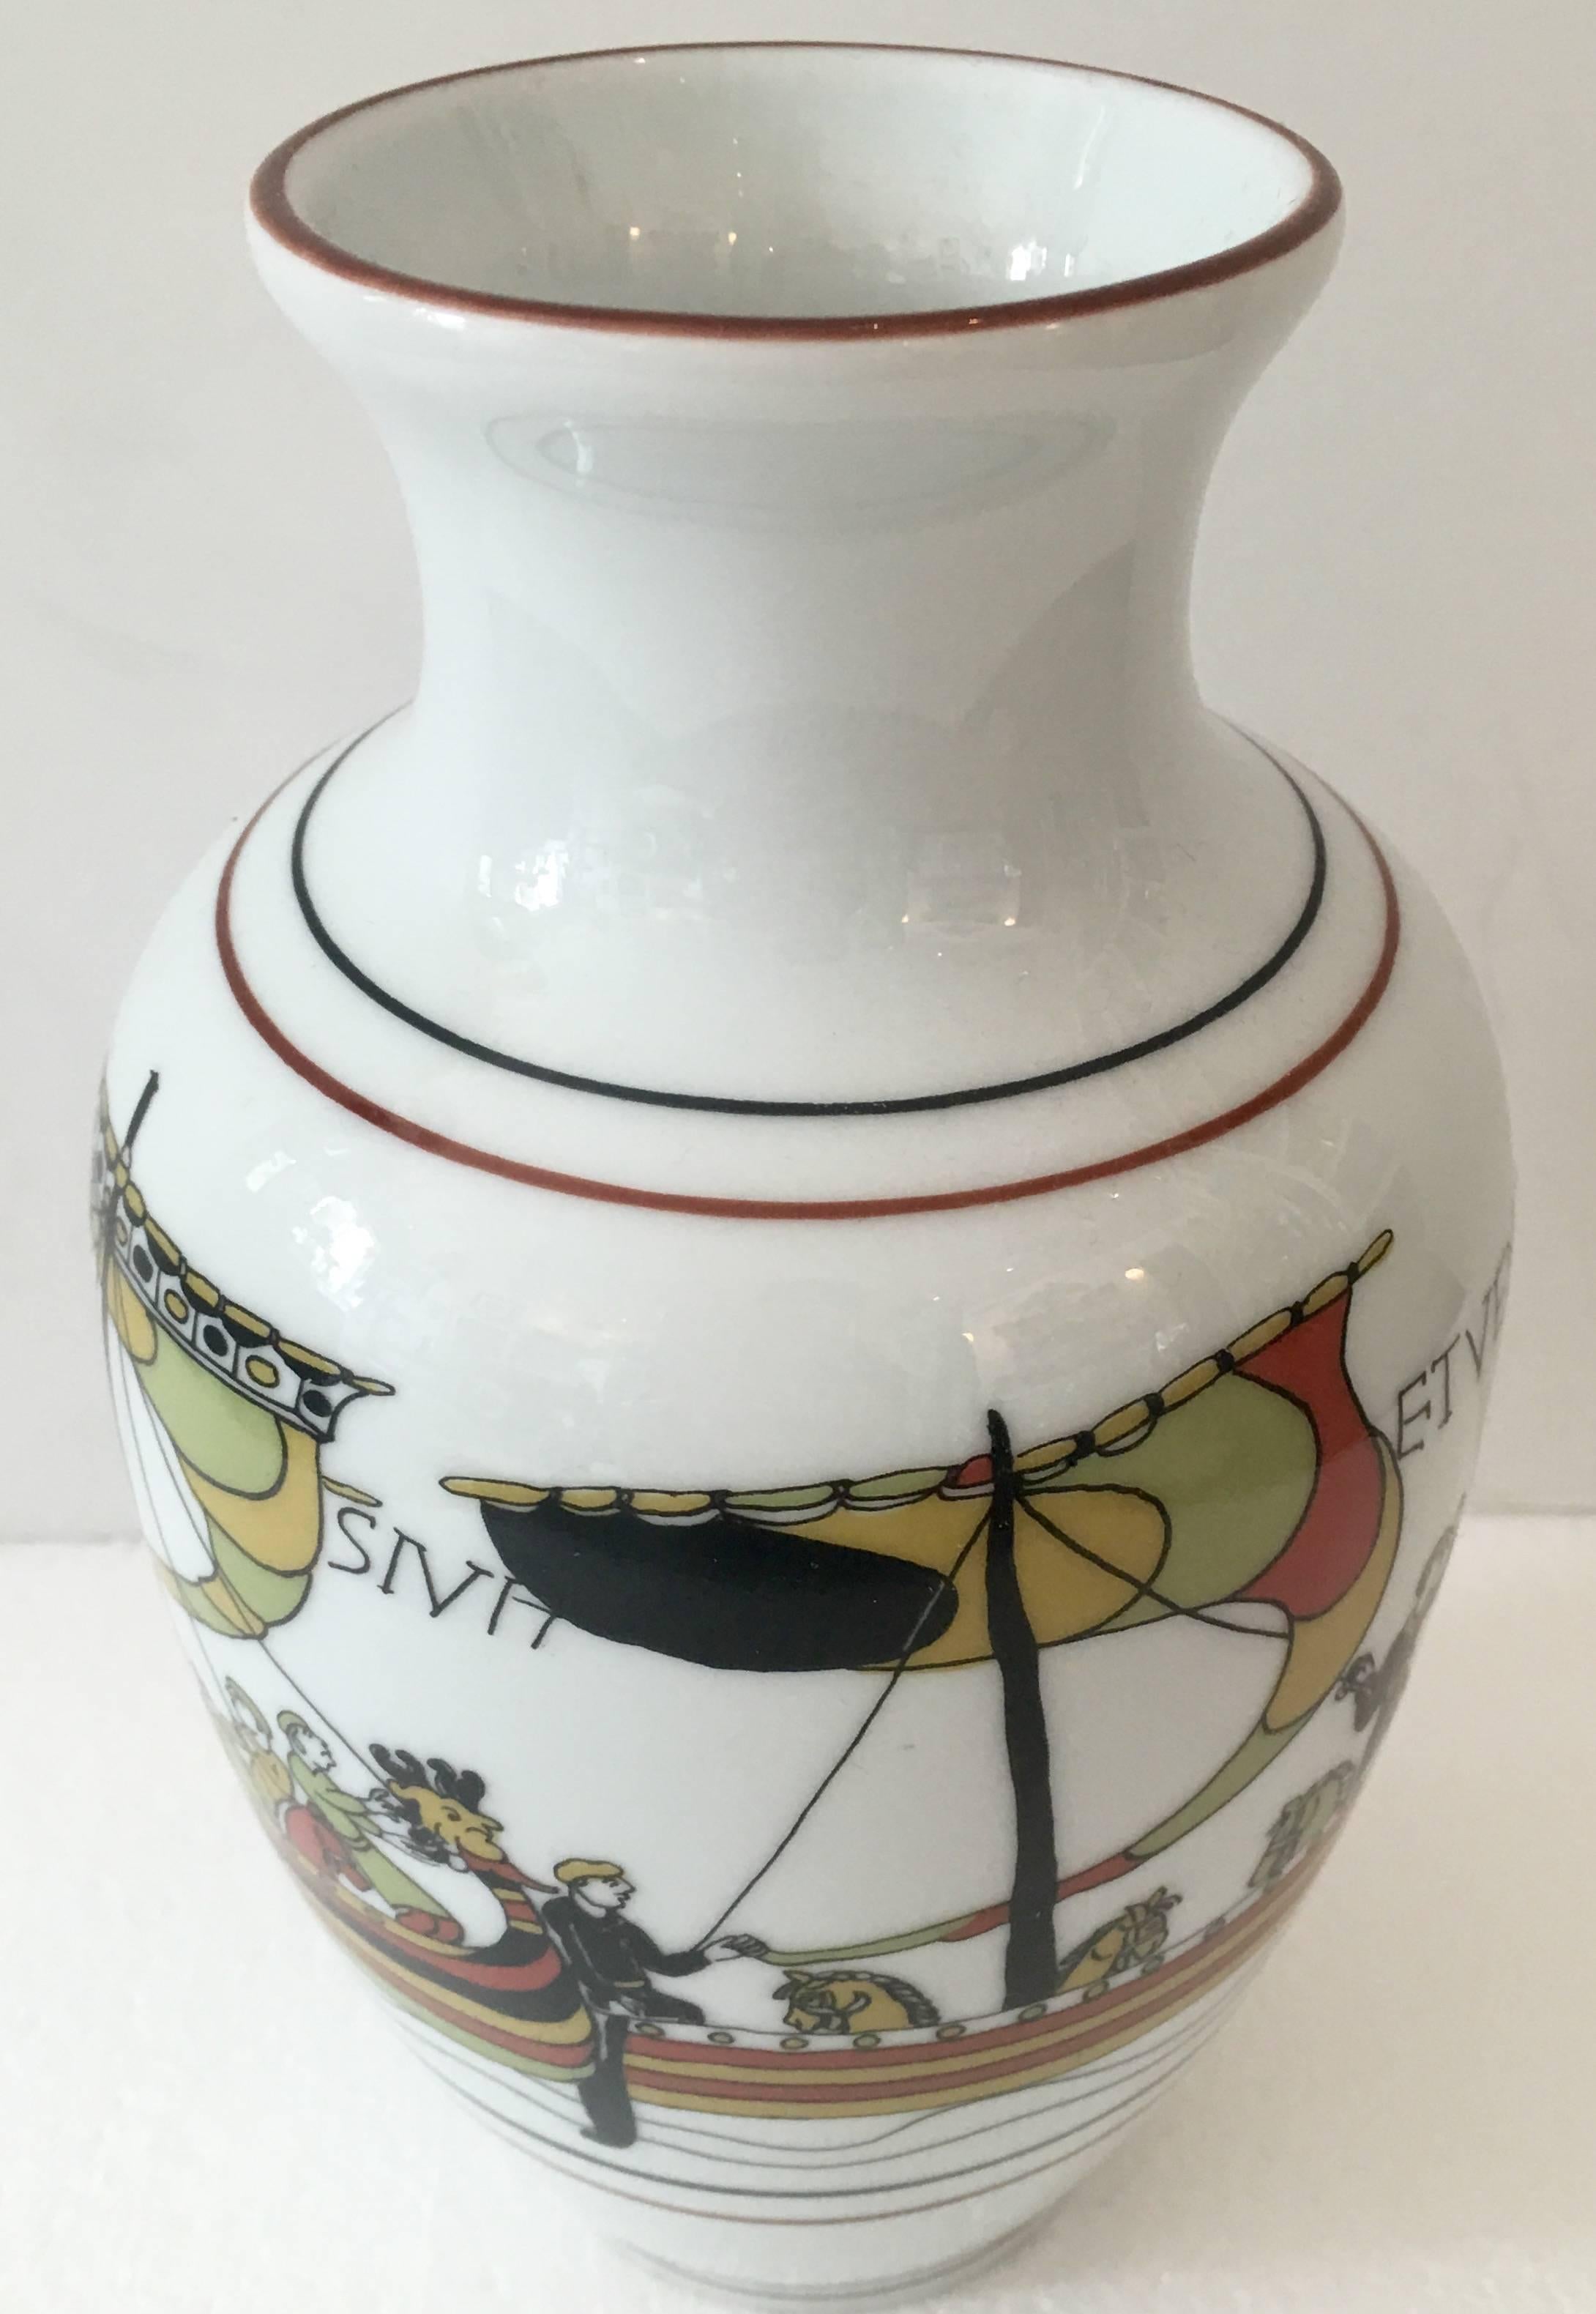 Rare 1940s French Limoges porcelain vase by Bayeux. Viking boat motif with the words, Tran Siva Et Venini. Hand-painted and signed on the underside, TM BX Limoges, France. Bayeux was a Limoge manufacturer located in Calvados Normandy, France.